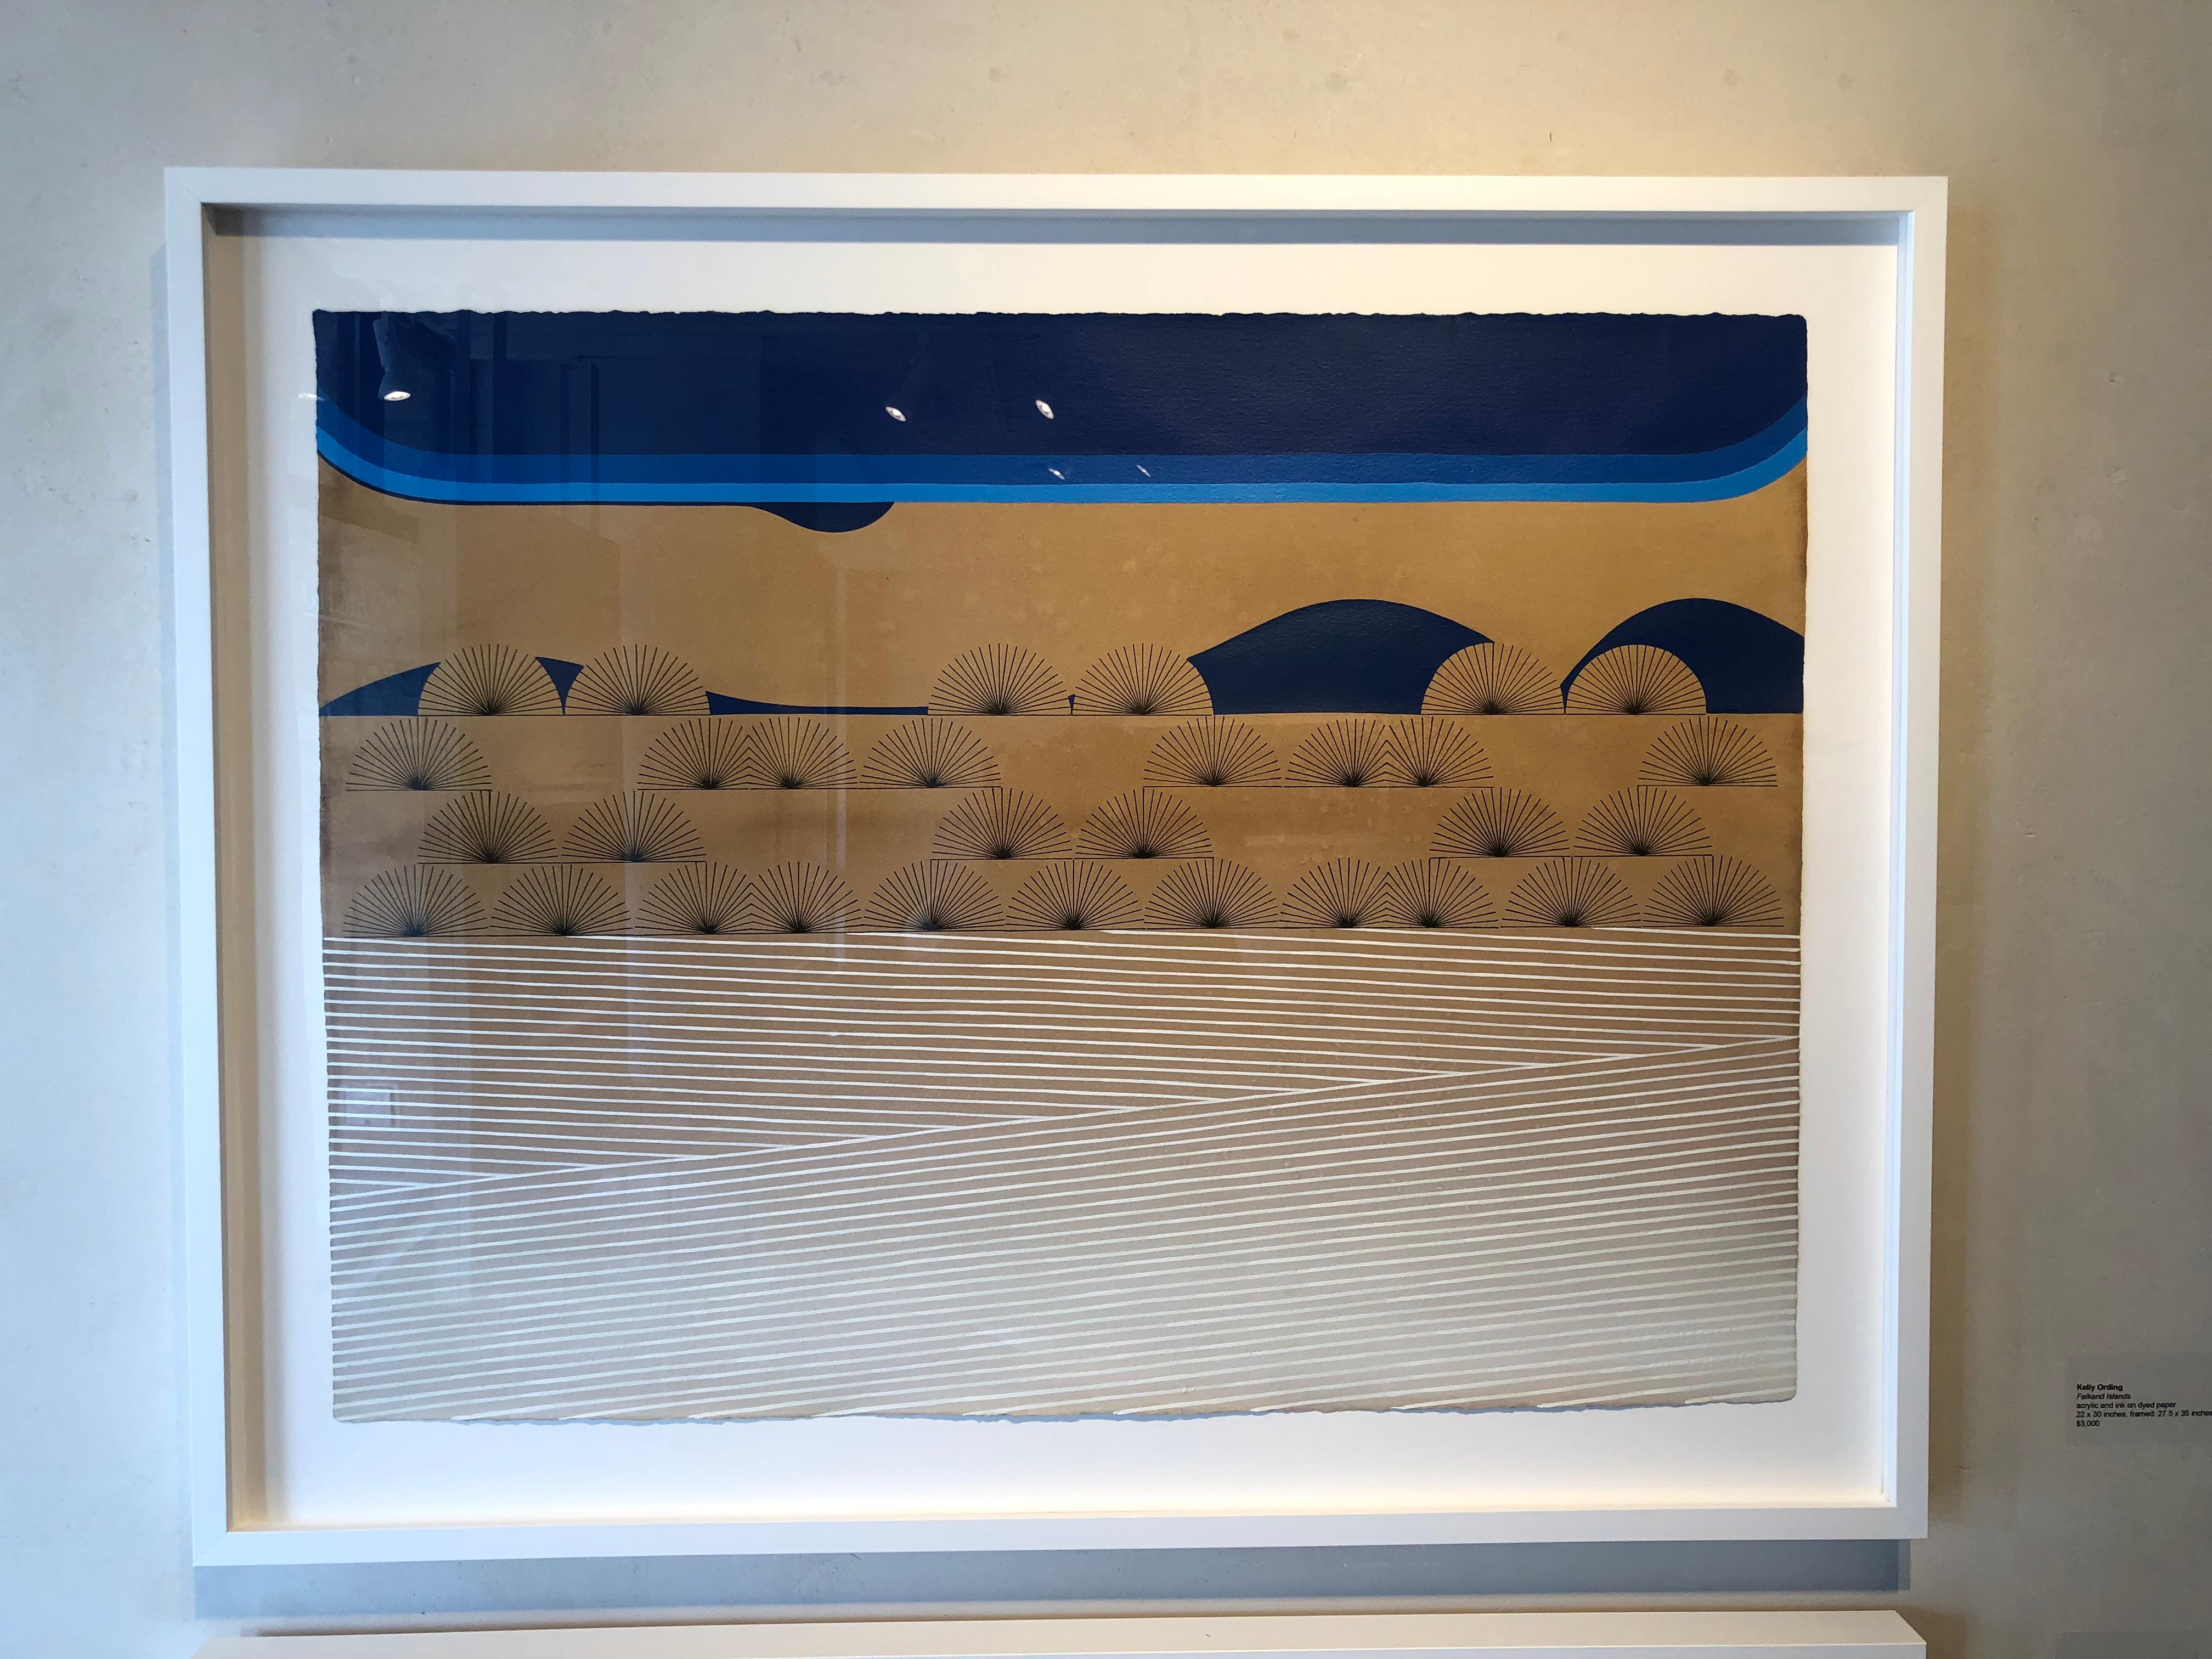 Falkland Islands-framed abstract linear acrylic in blues and white on dyed paper - Painting by Kelly Ording